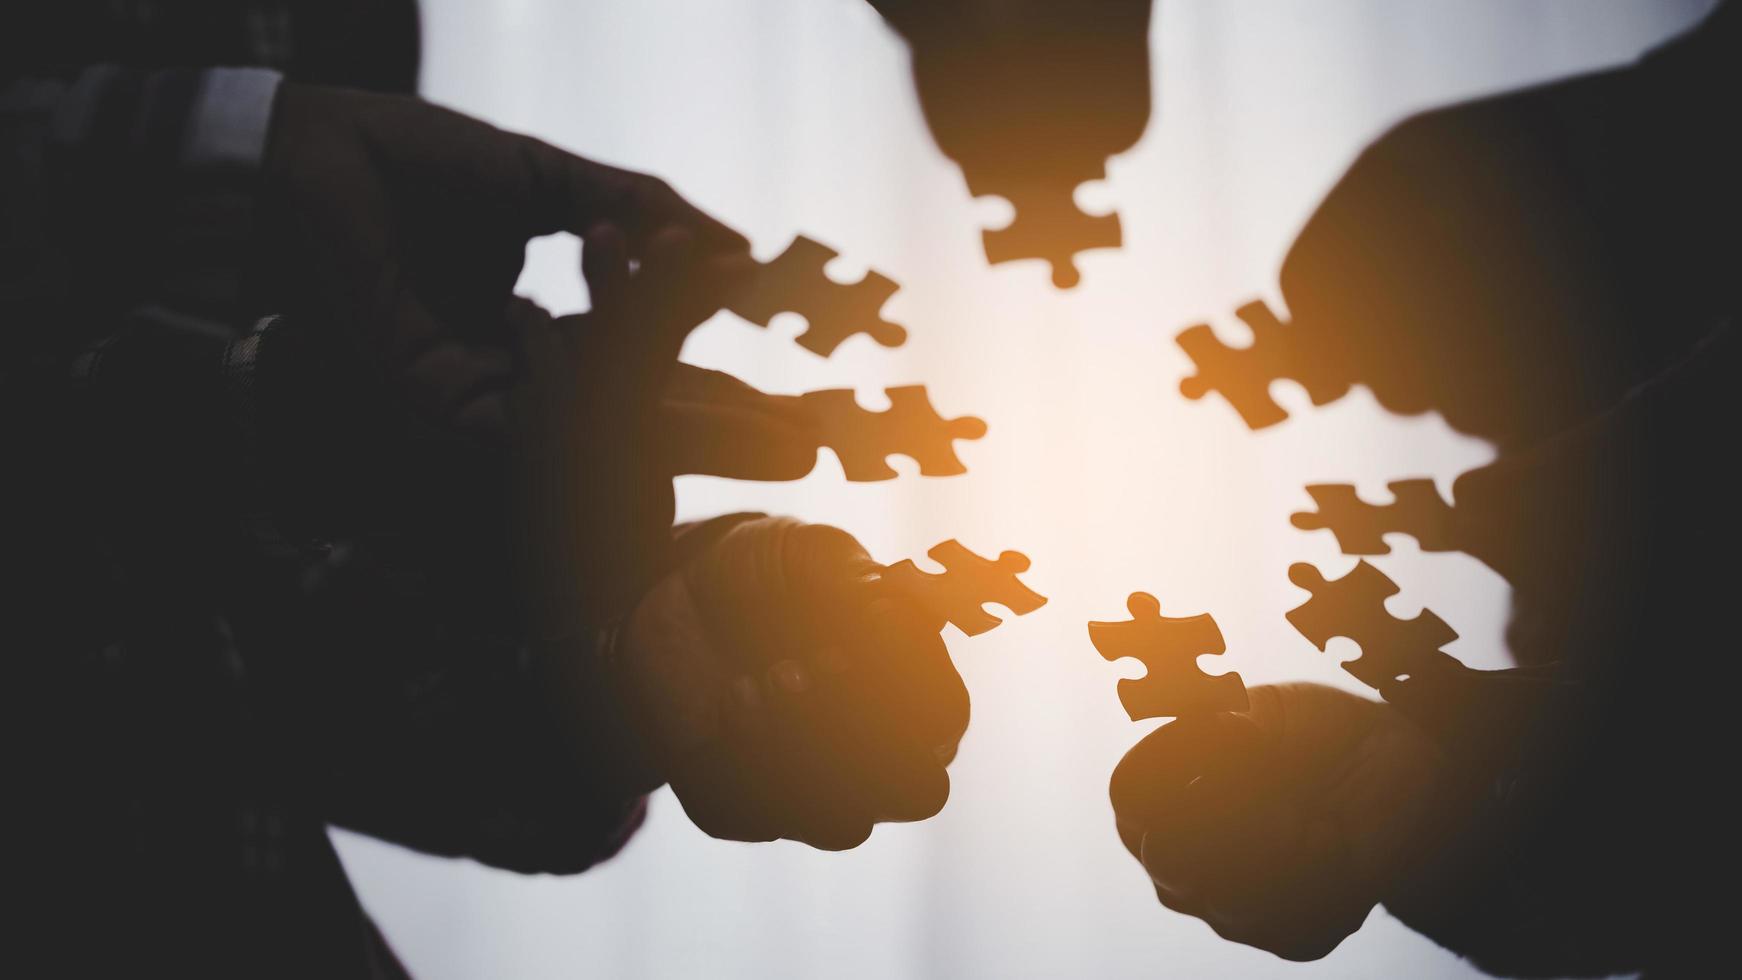 hand of business people connecting jigsaw puzzle photo